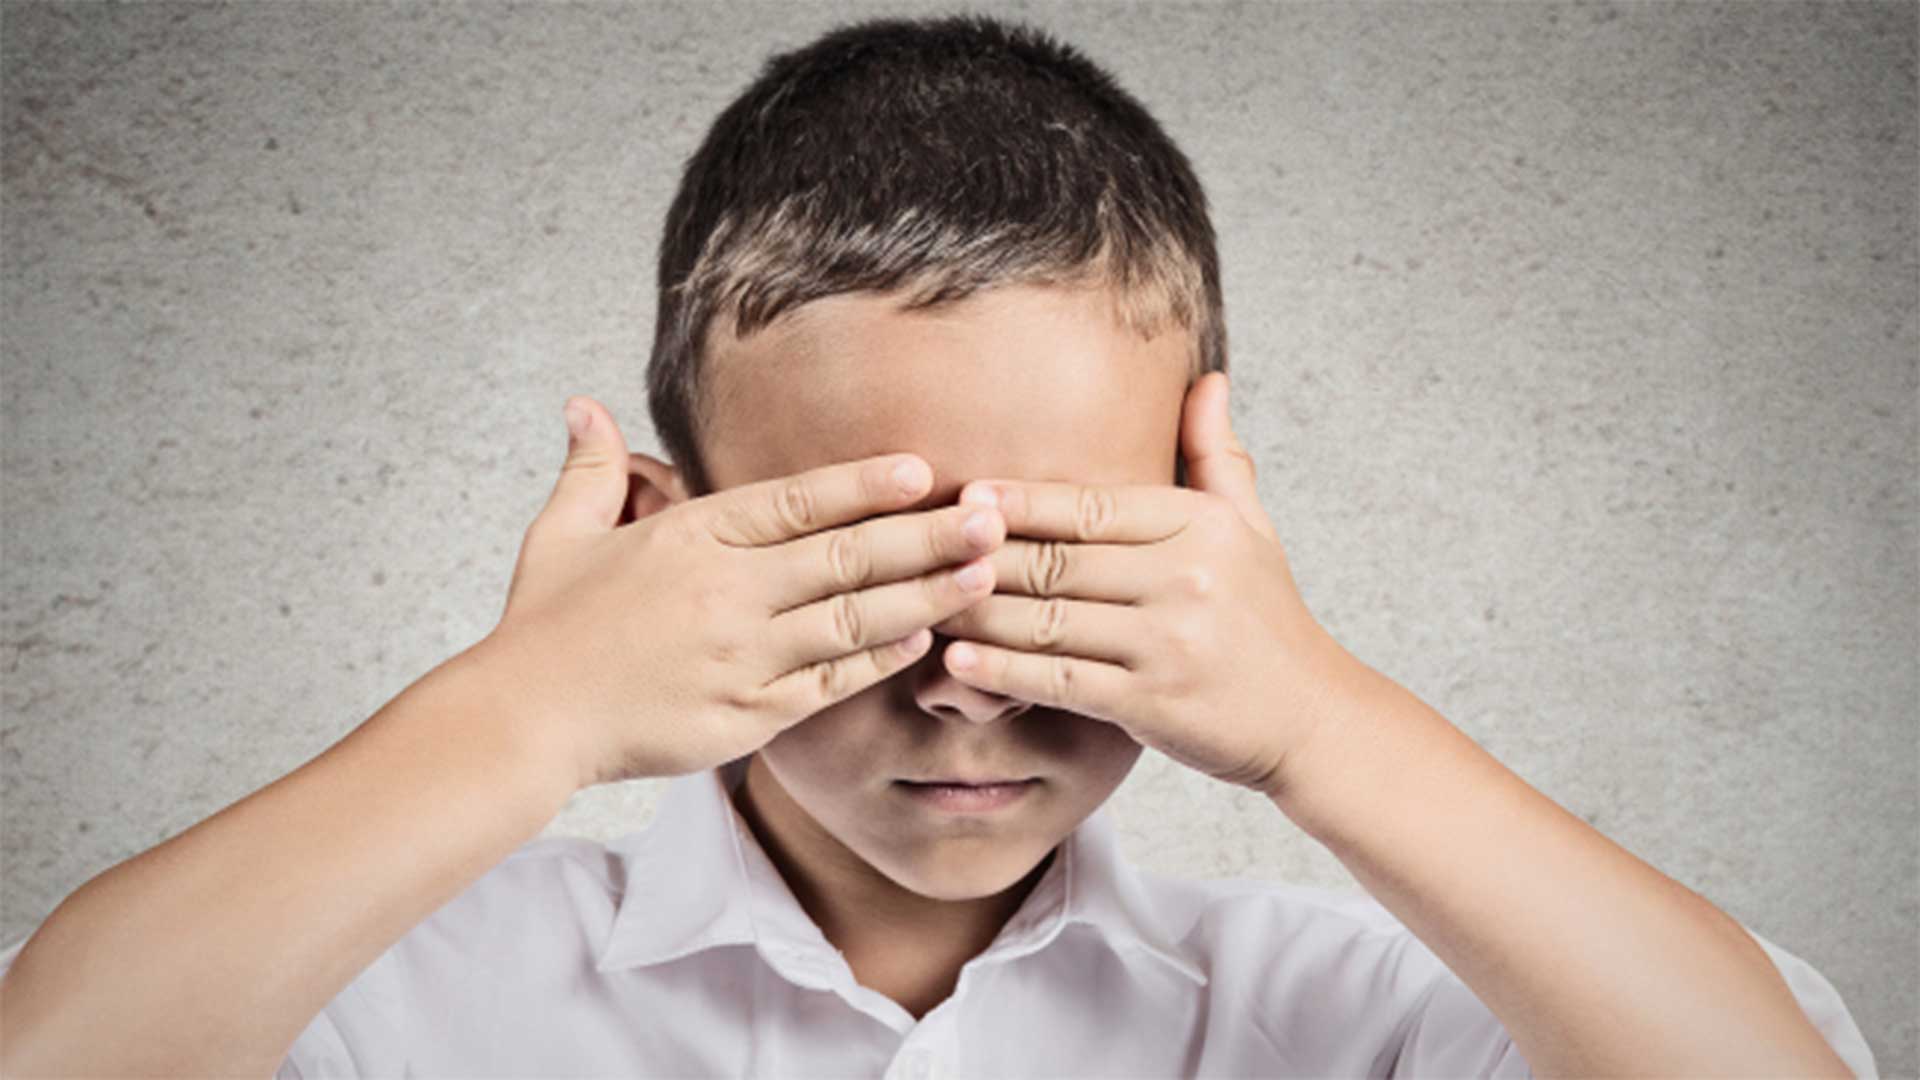 Child hiding his eyes with his hands